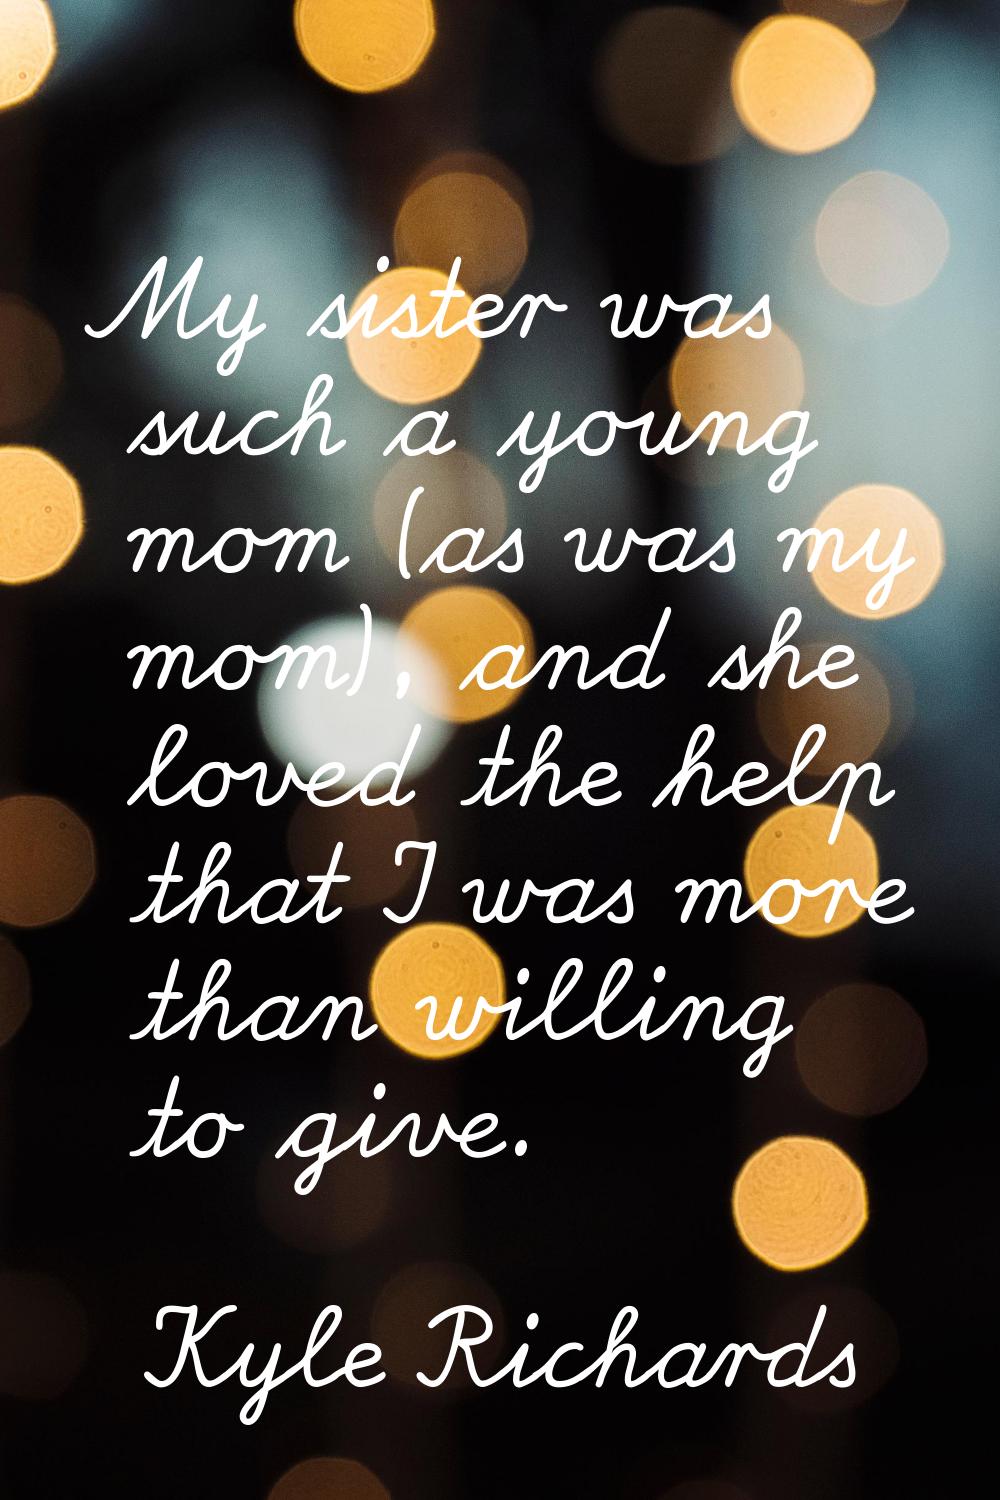 My sister was such a young mom (as was my mom), and she loved the help that I was more than willing